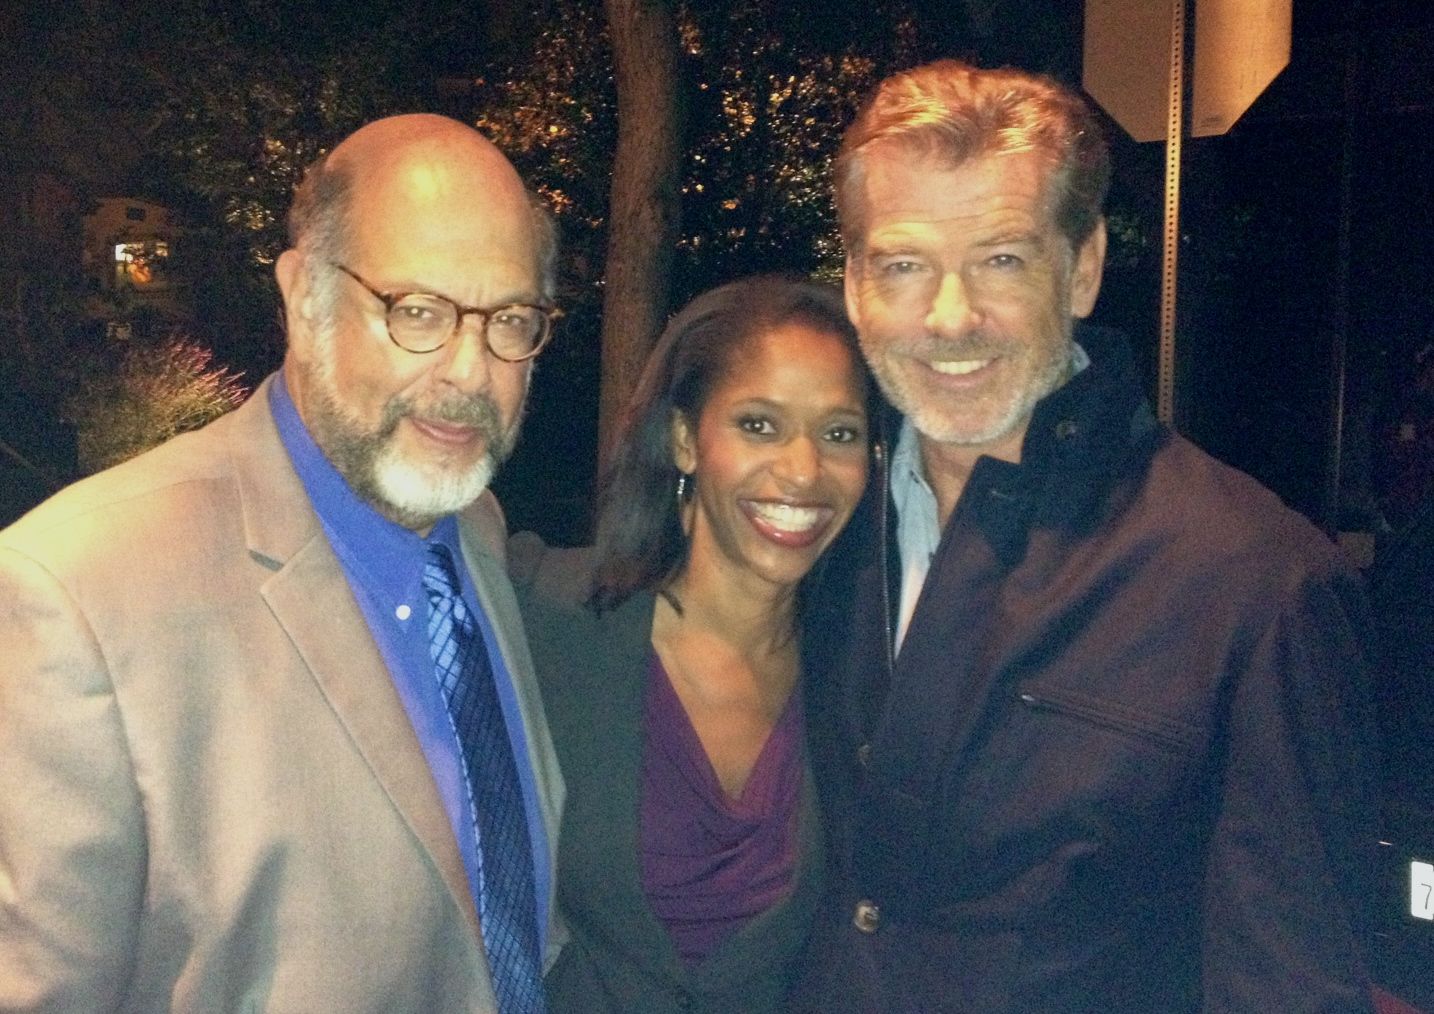 Fred Melamed, Merrin Dungey and Pierce Brosnan in How To Make Love Like An Englishman